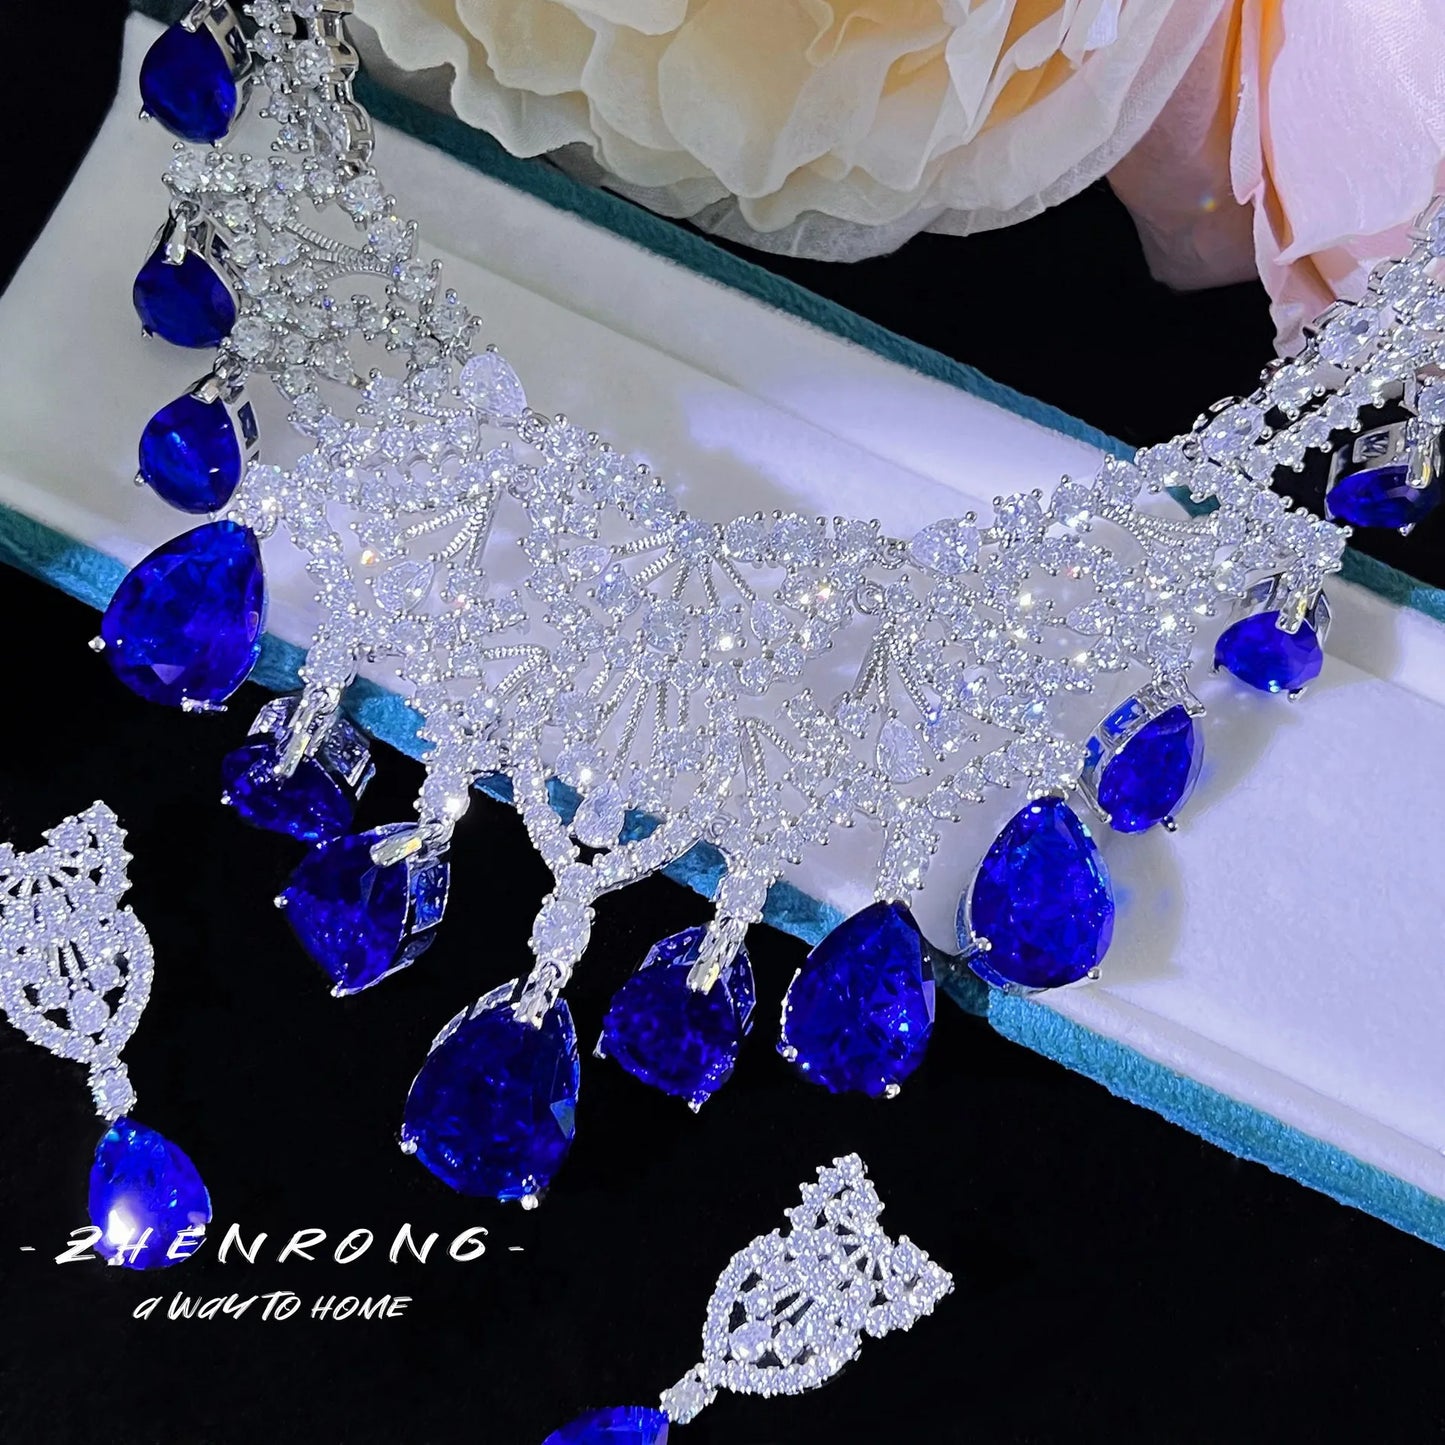 Luxury Designer Jewelry Choker Necklaces Earrings Sets Water Drop Blue Sapphires Silver Color Wedding Bride Women Accessories - Hiron Store